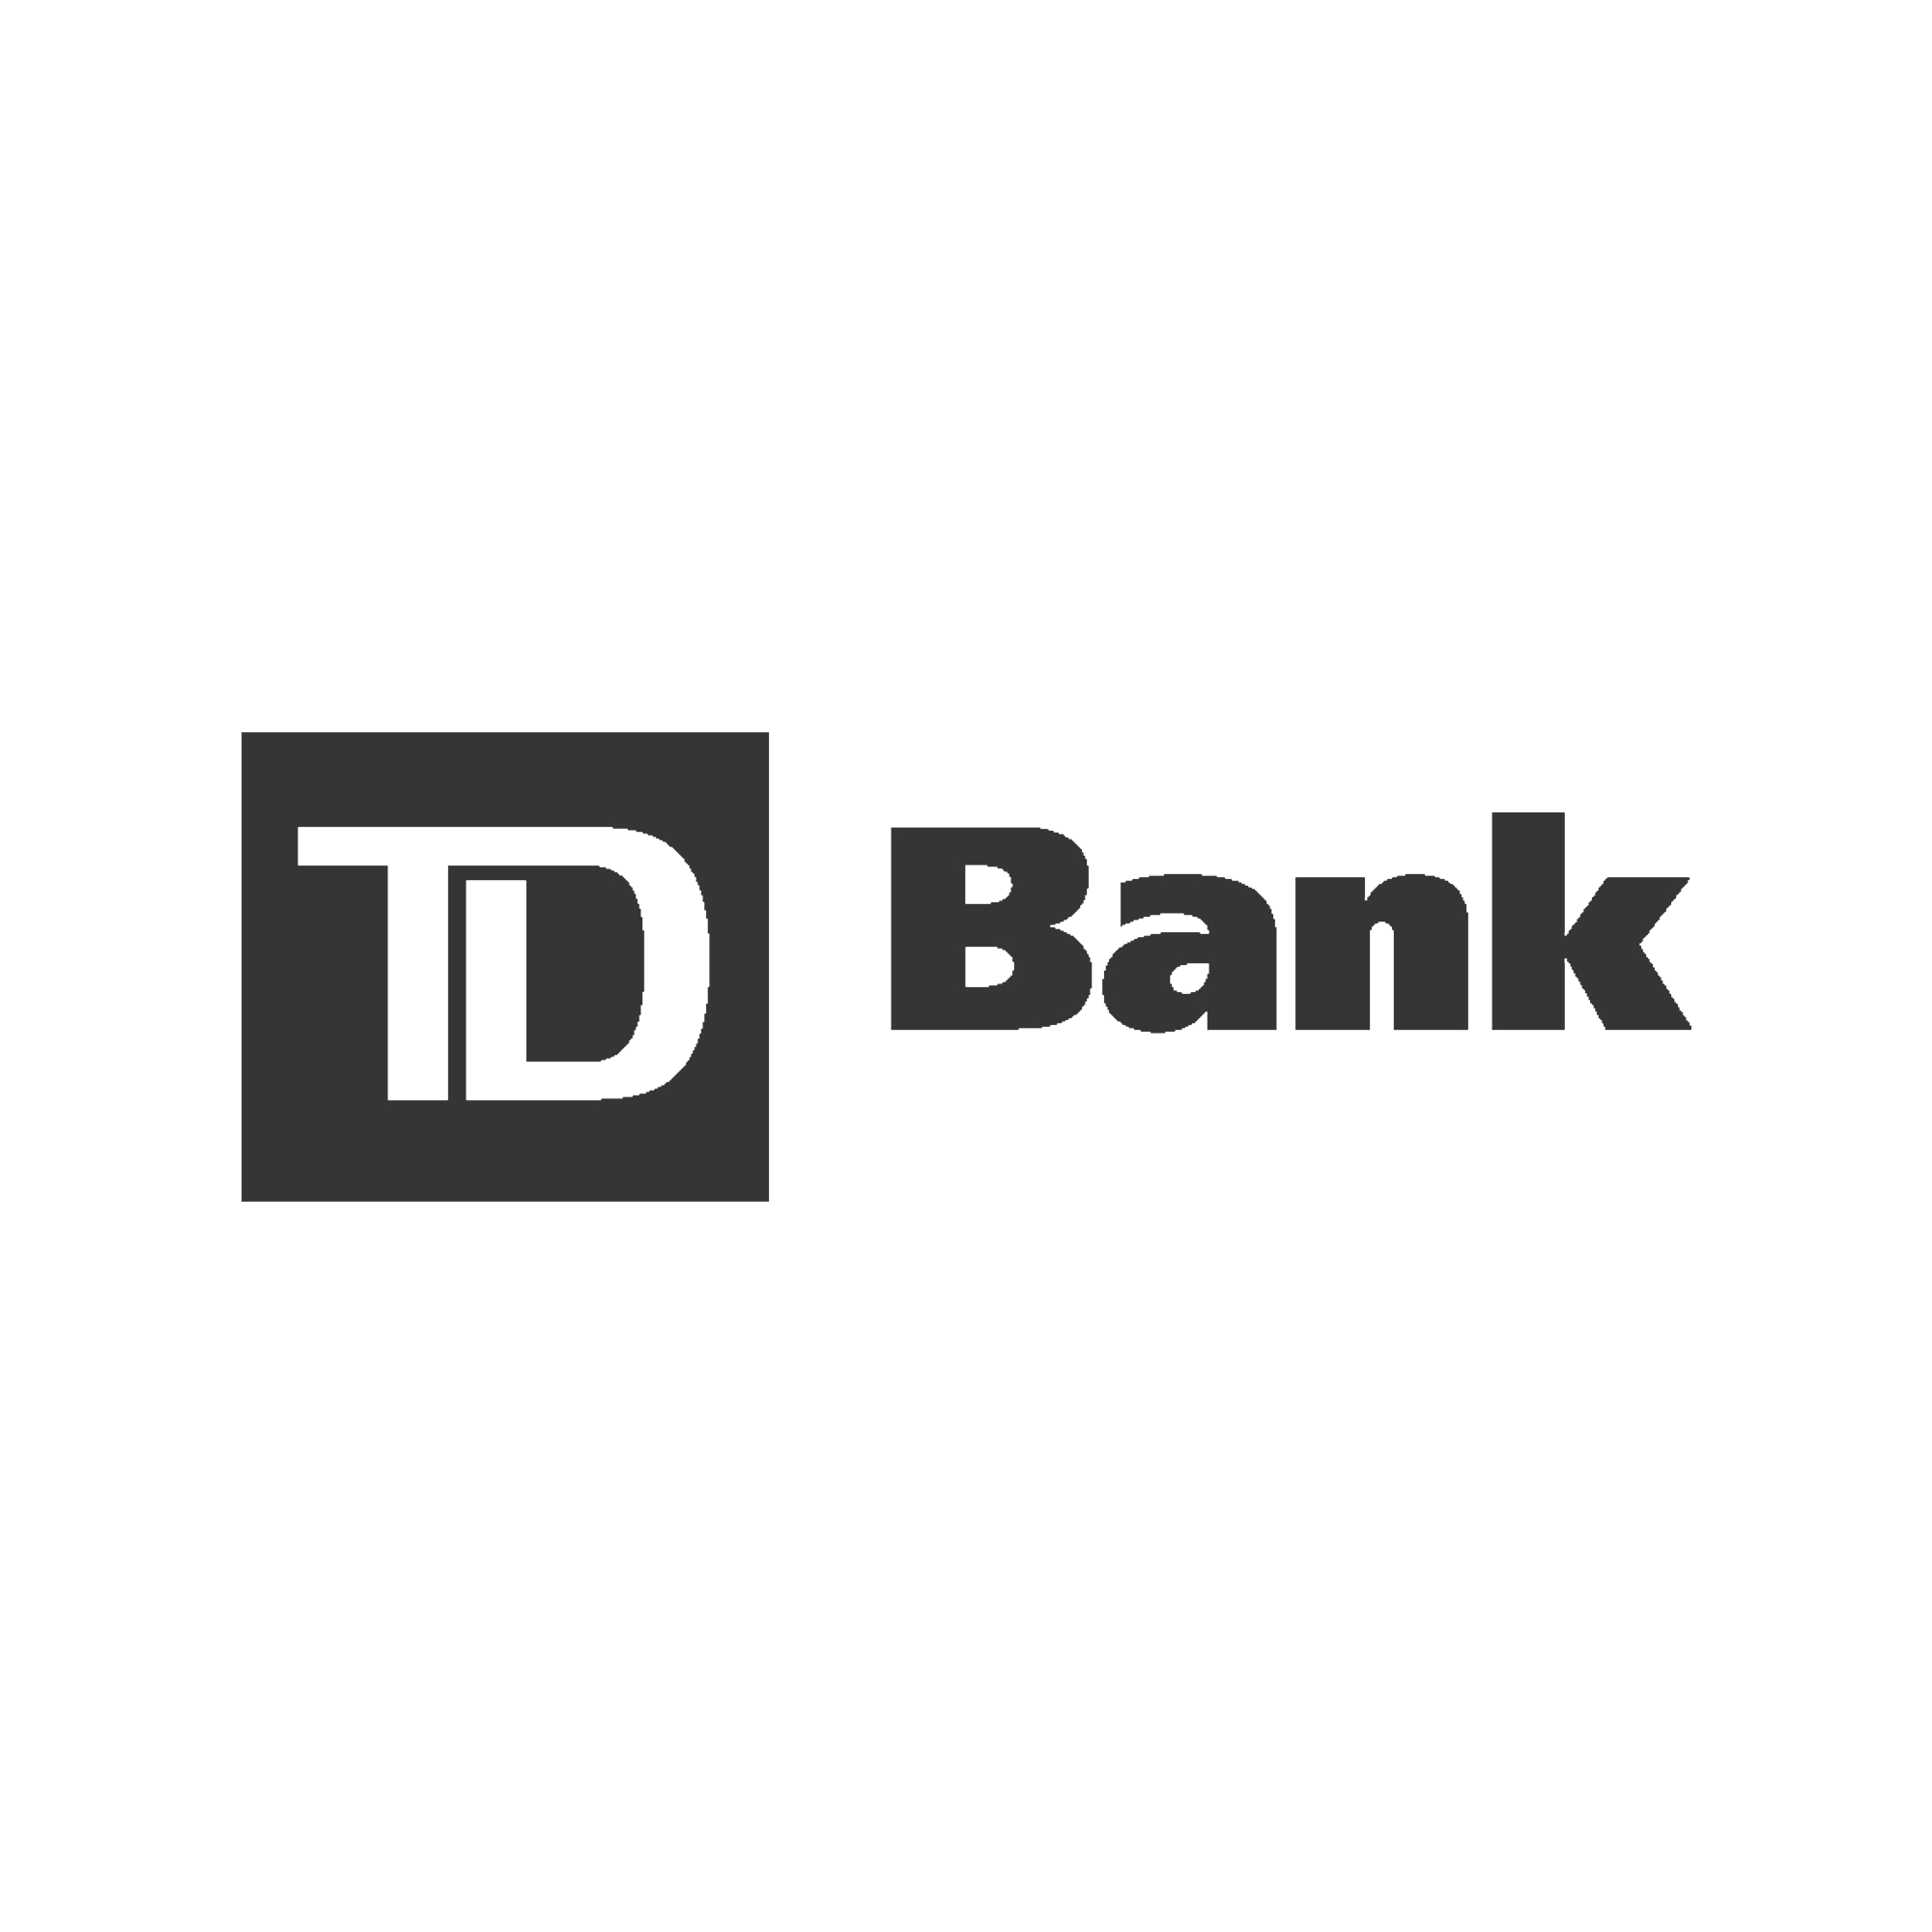 5_TD Bank_CLEAR.png